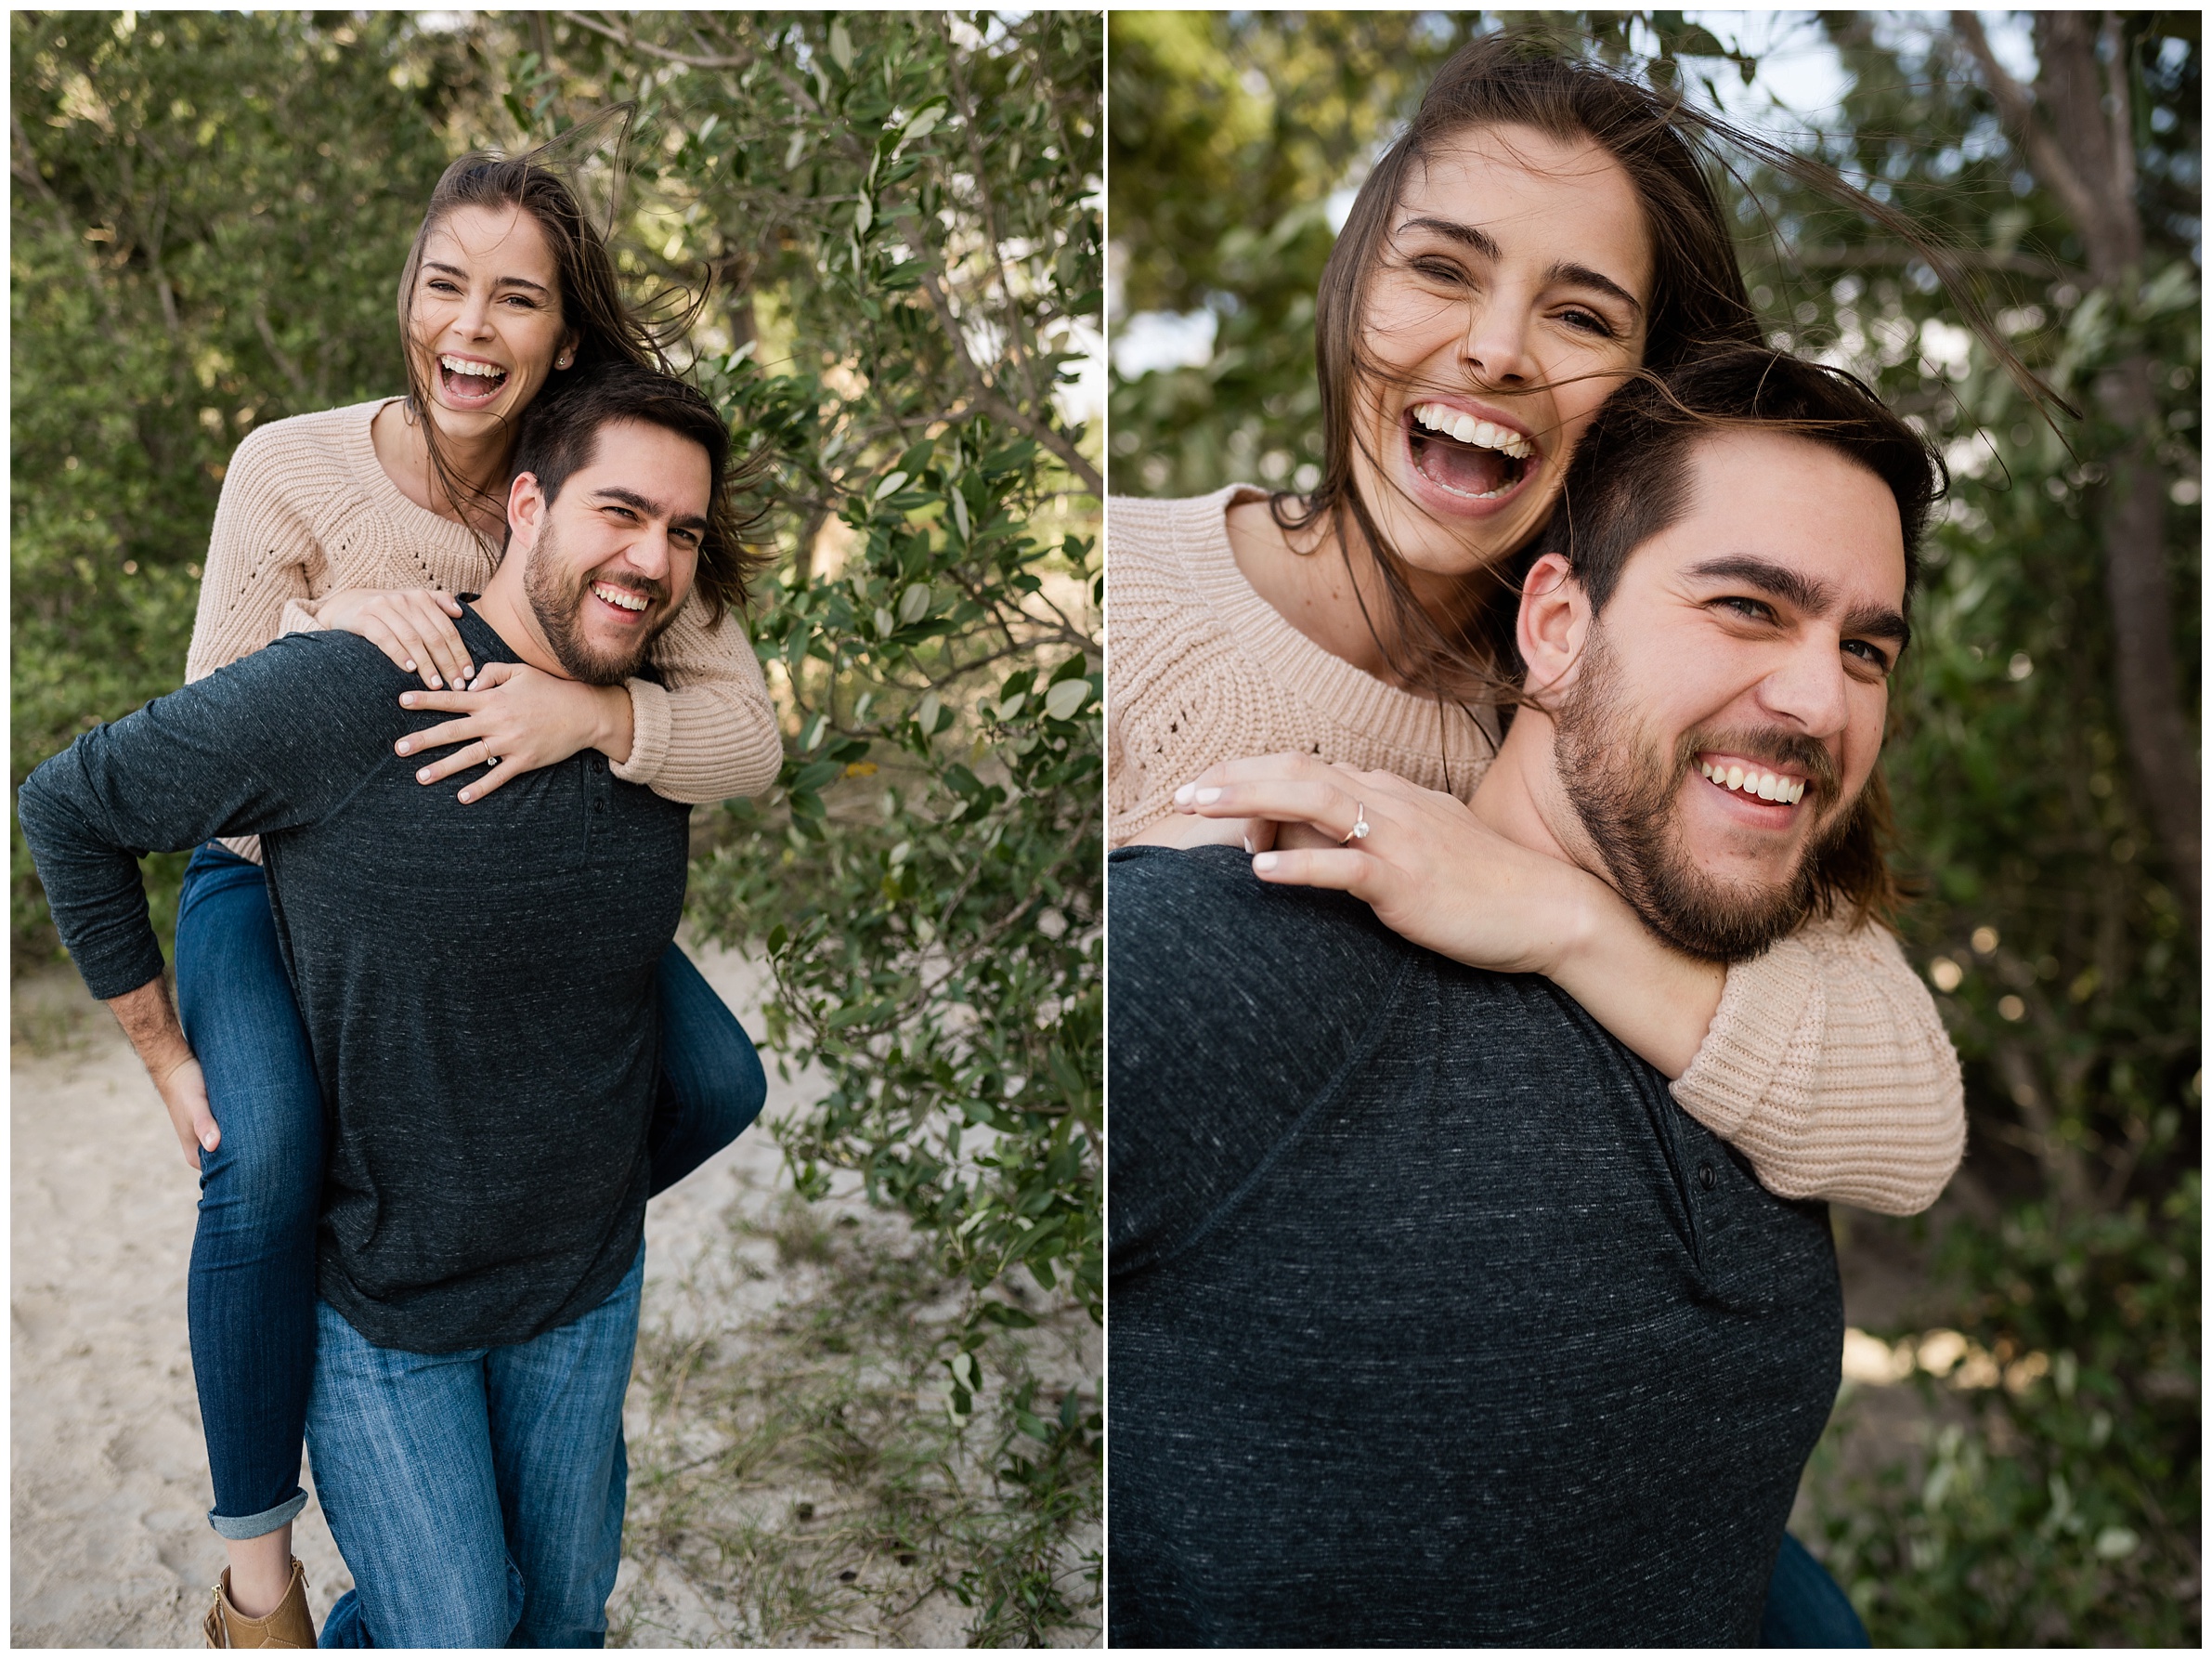 grace and tyler smiling at engagement session in cedar key fl